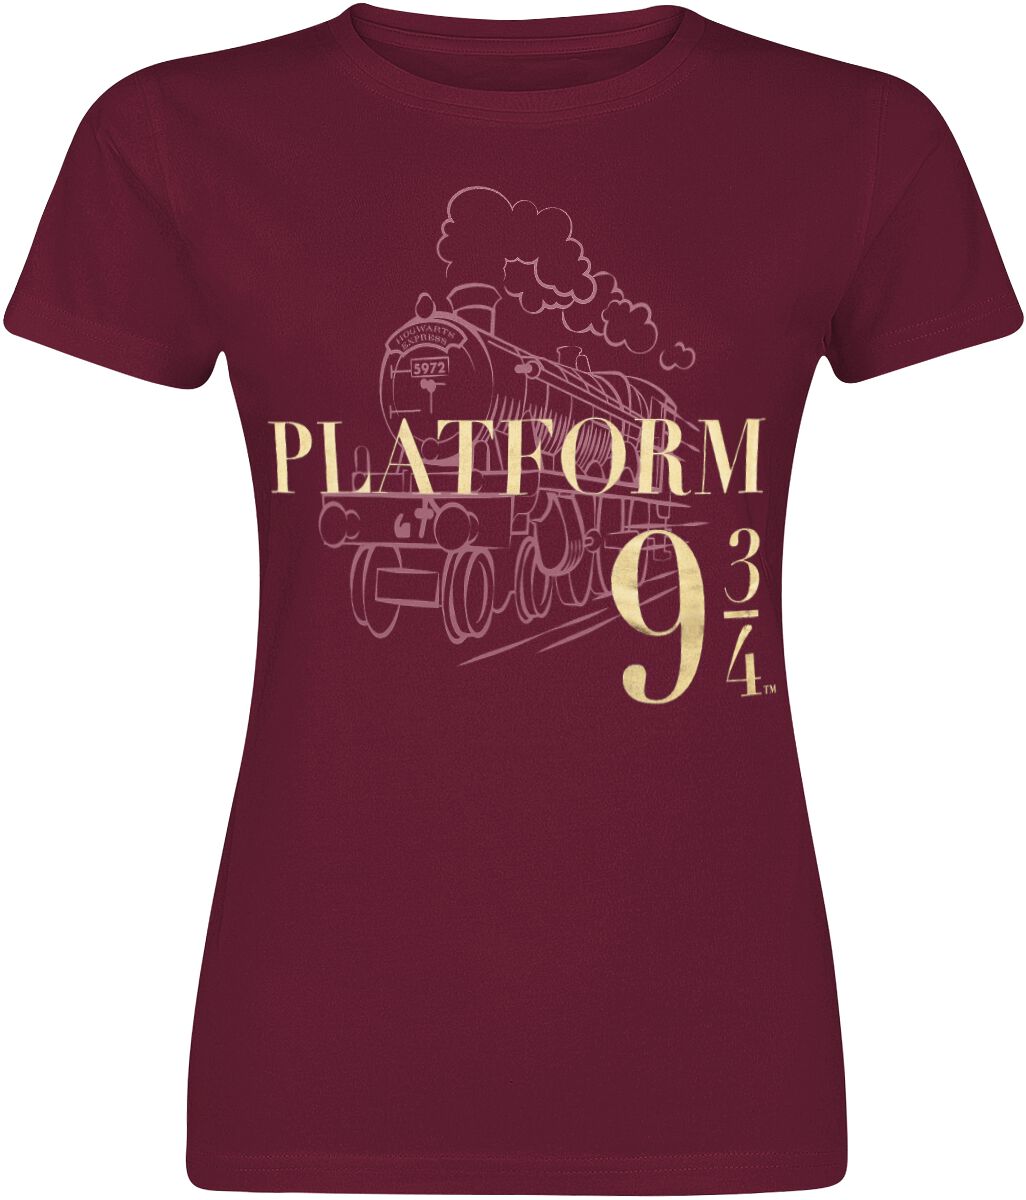 Image of T-Shirt di Harry Potter - Platform 9 3/4 - S a XL - Donna - rosso